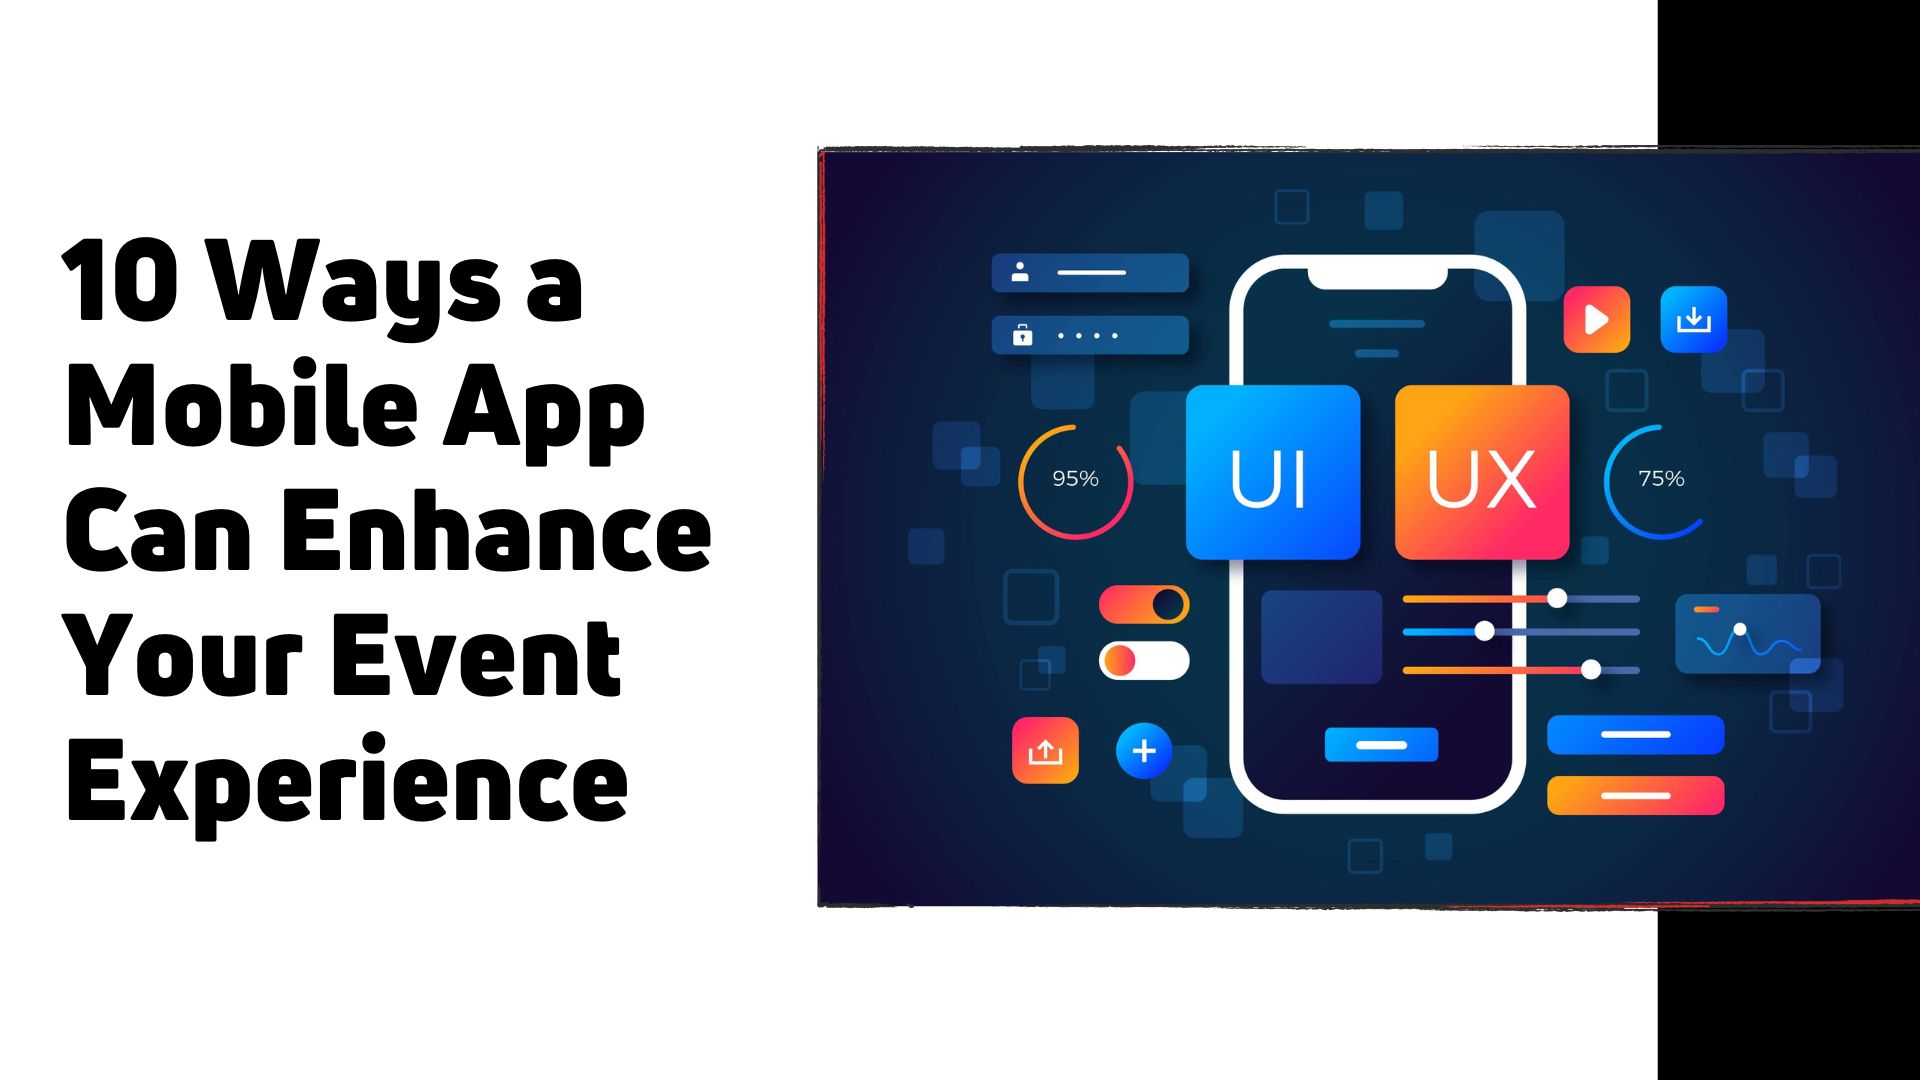 10 Ways a Mobile App Can Enhance Your Event Experience